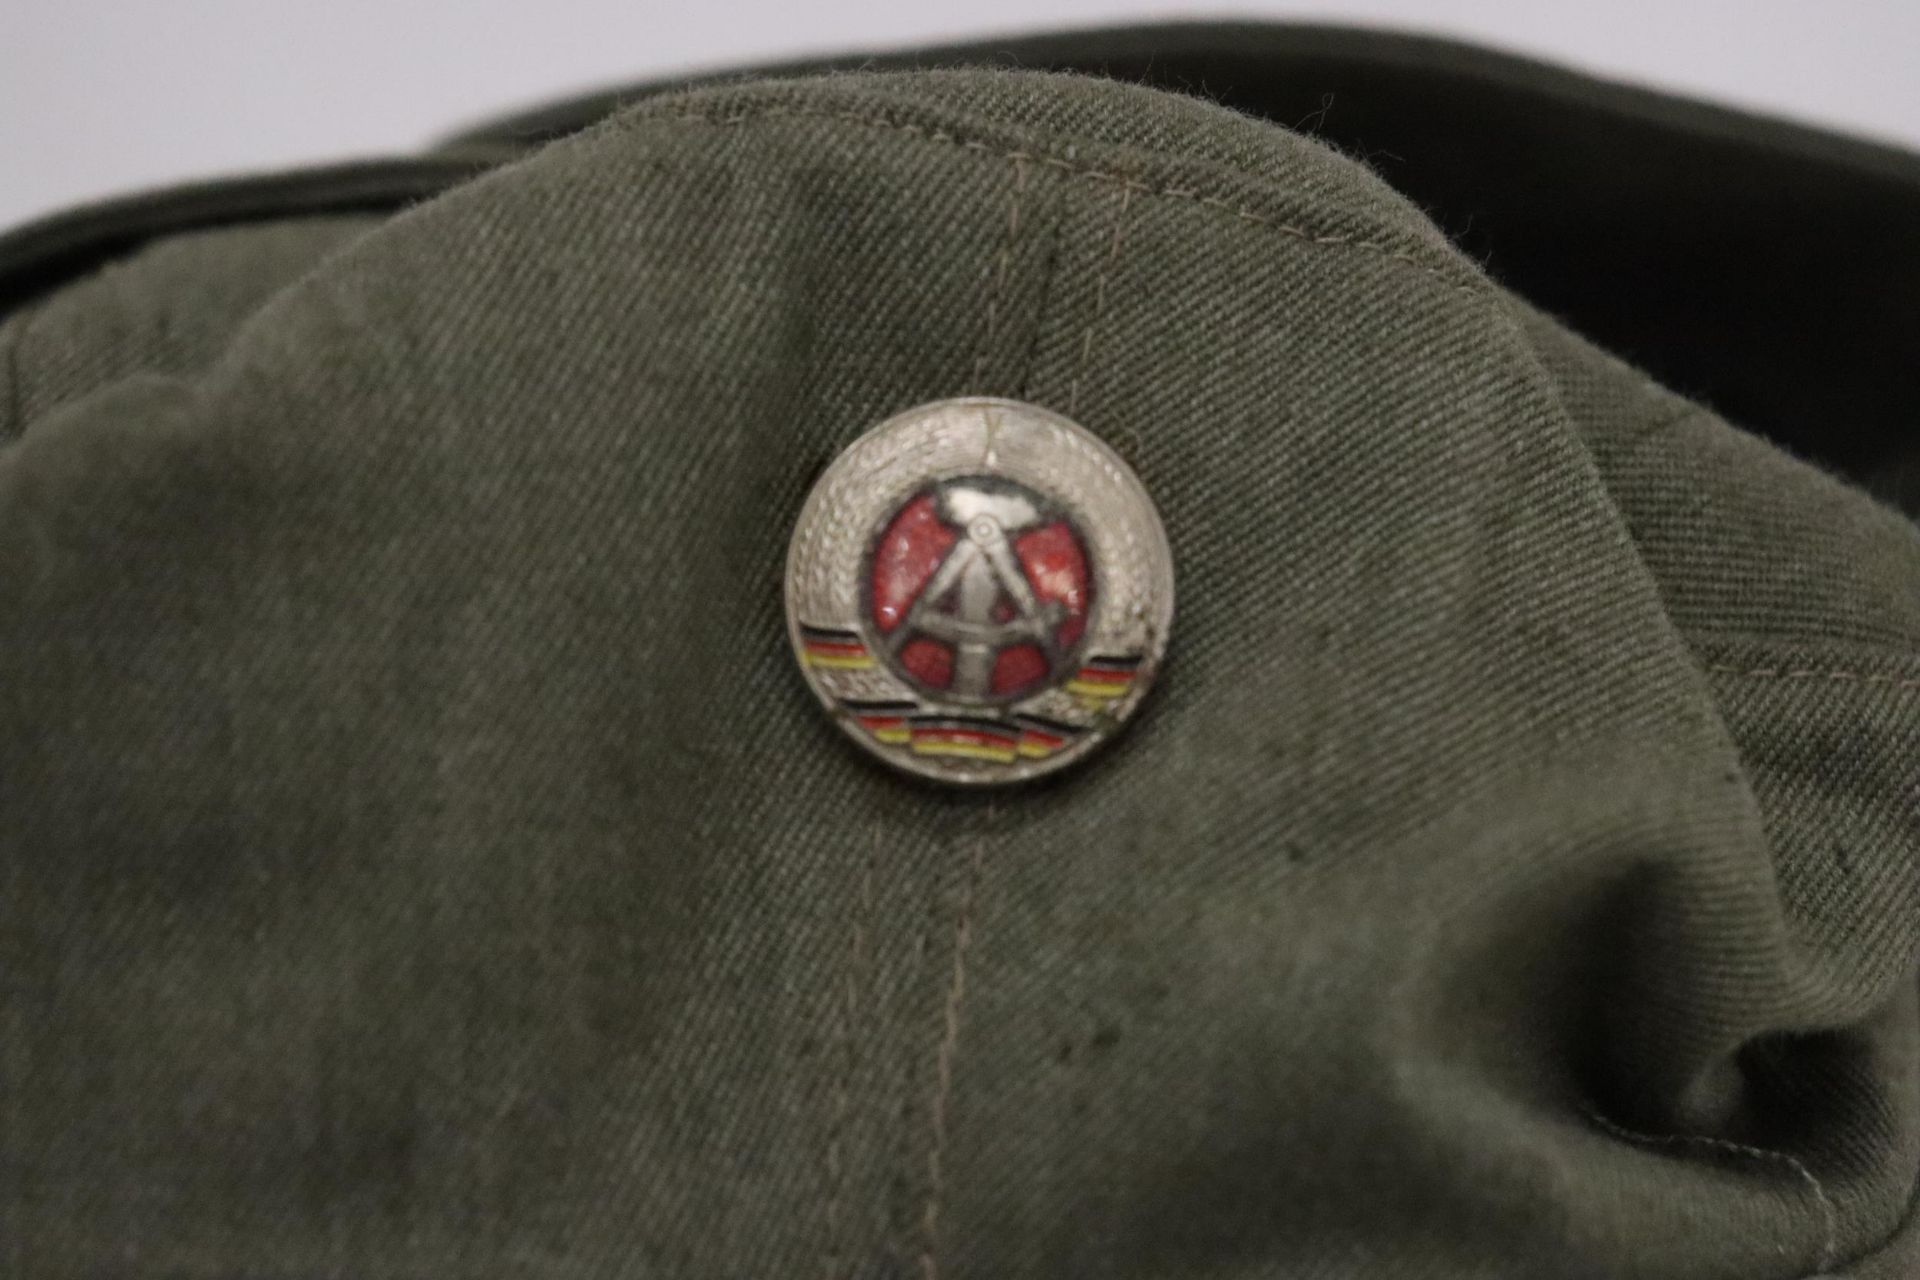 A 1950'S EAST GERMAN MILITARY CAP AND BADGE - Image 2 of 6